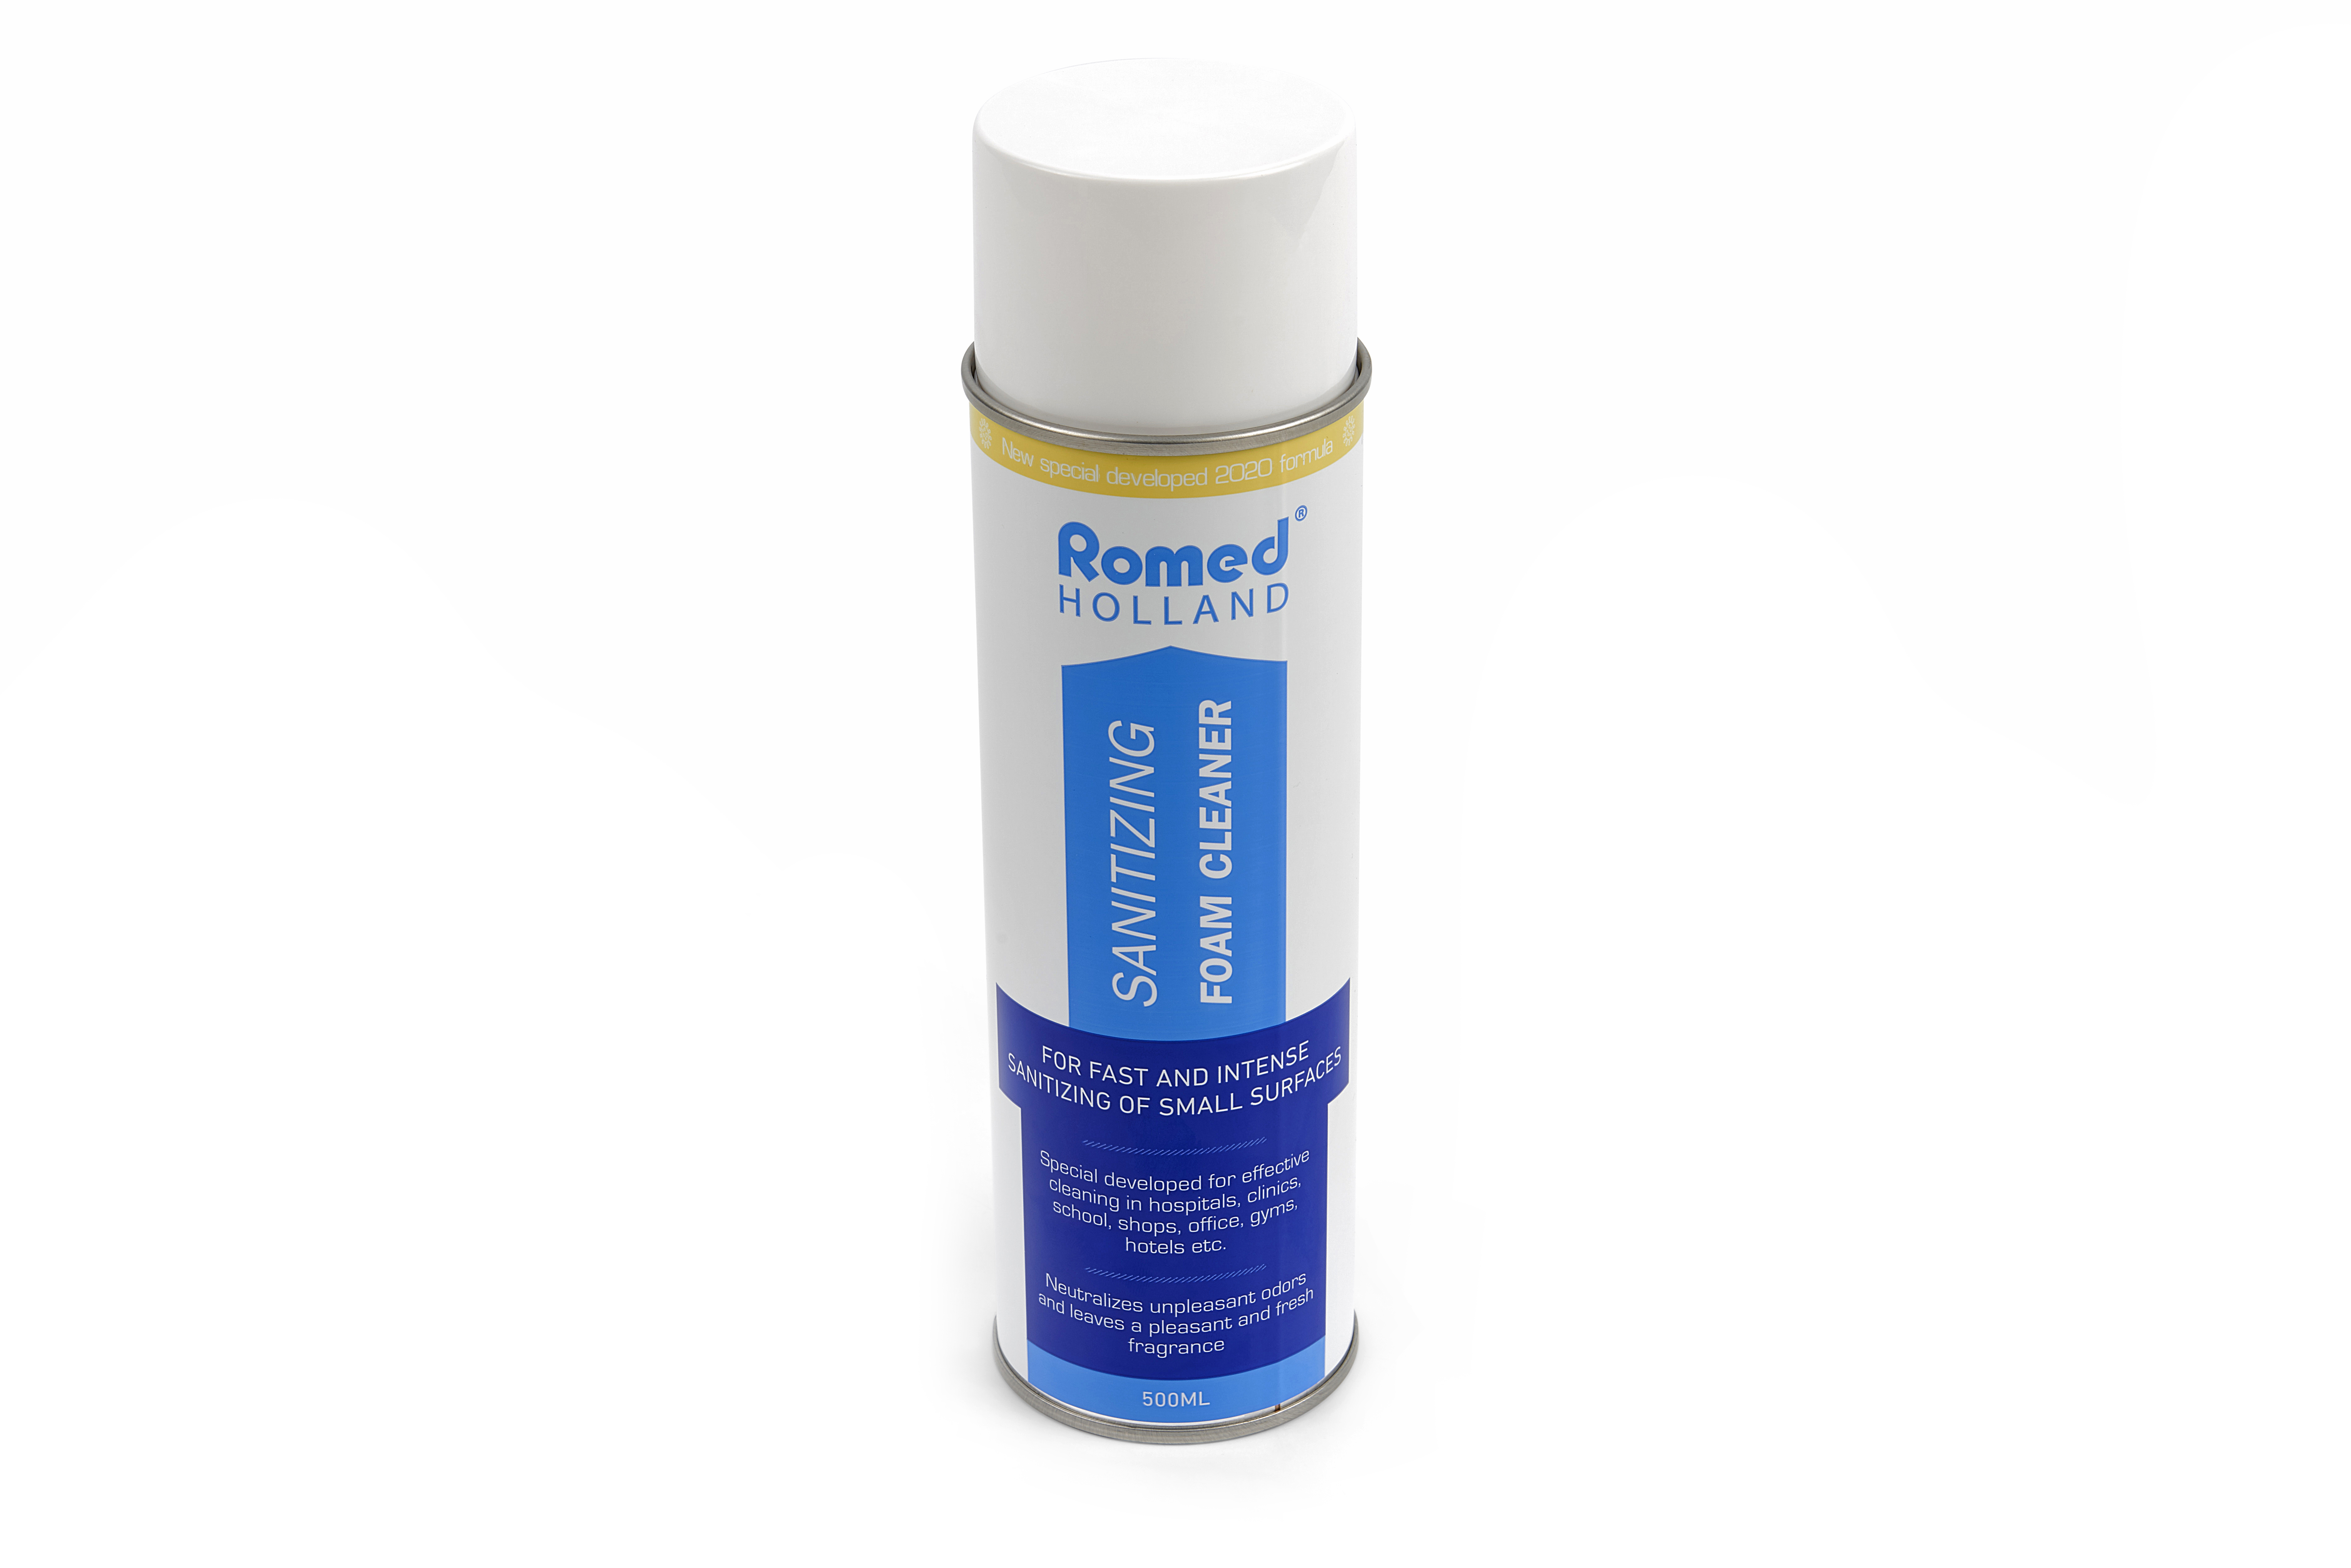 COV19-FOAM Romed Sanitizing foam, for fast and intense sanitizing of small surfaces. 12 aerosols, 500ml, in a carton.